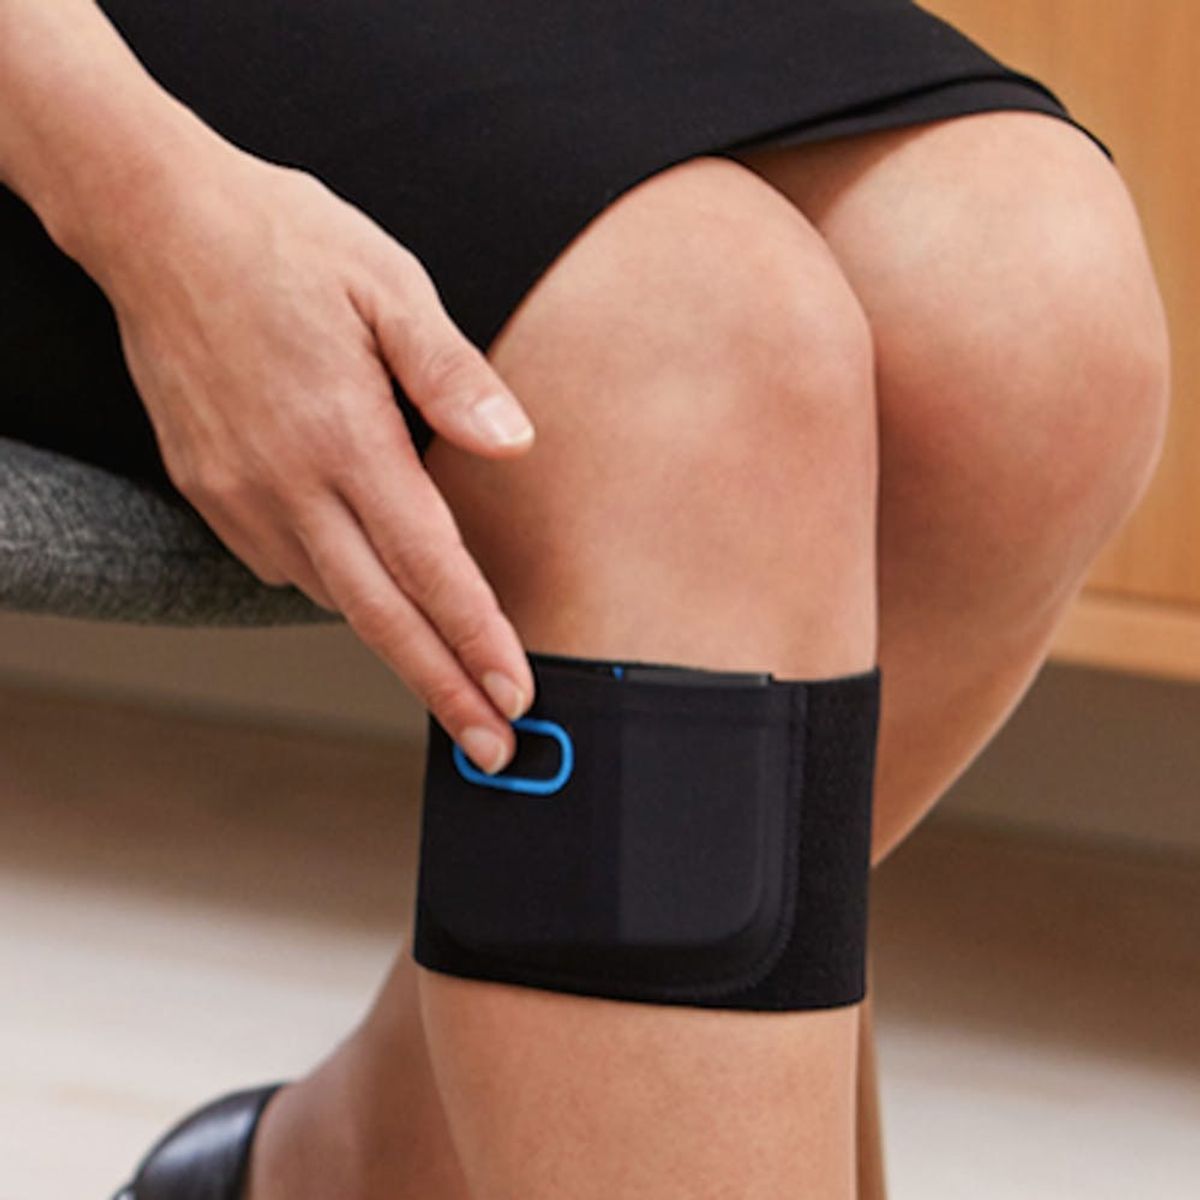 This Wearable Relieves Chronic Pain Without Drugs